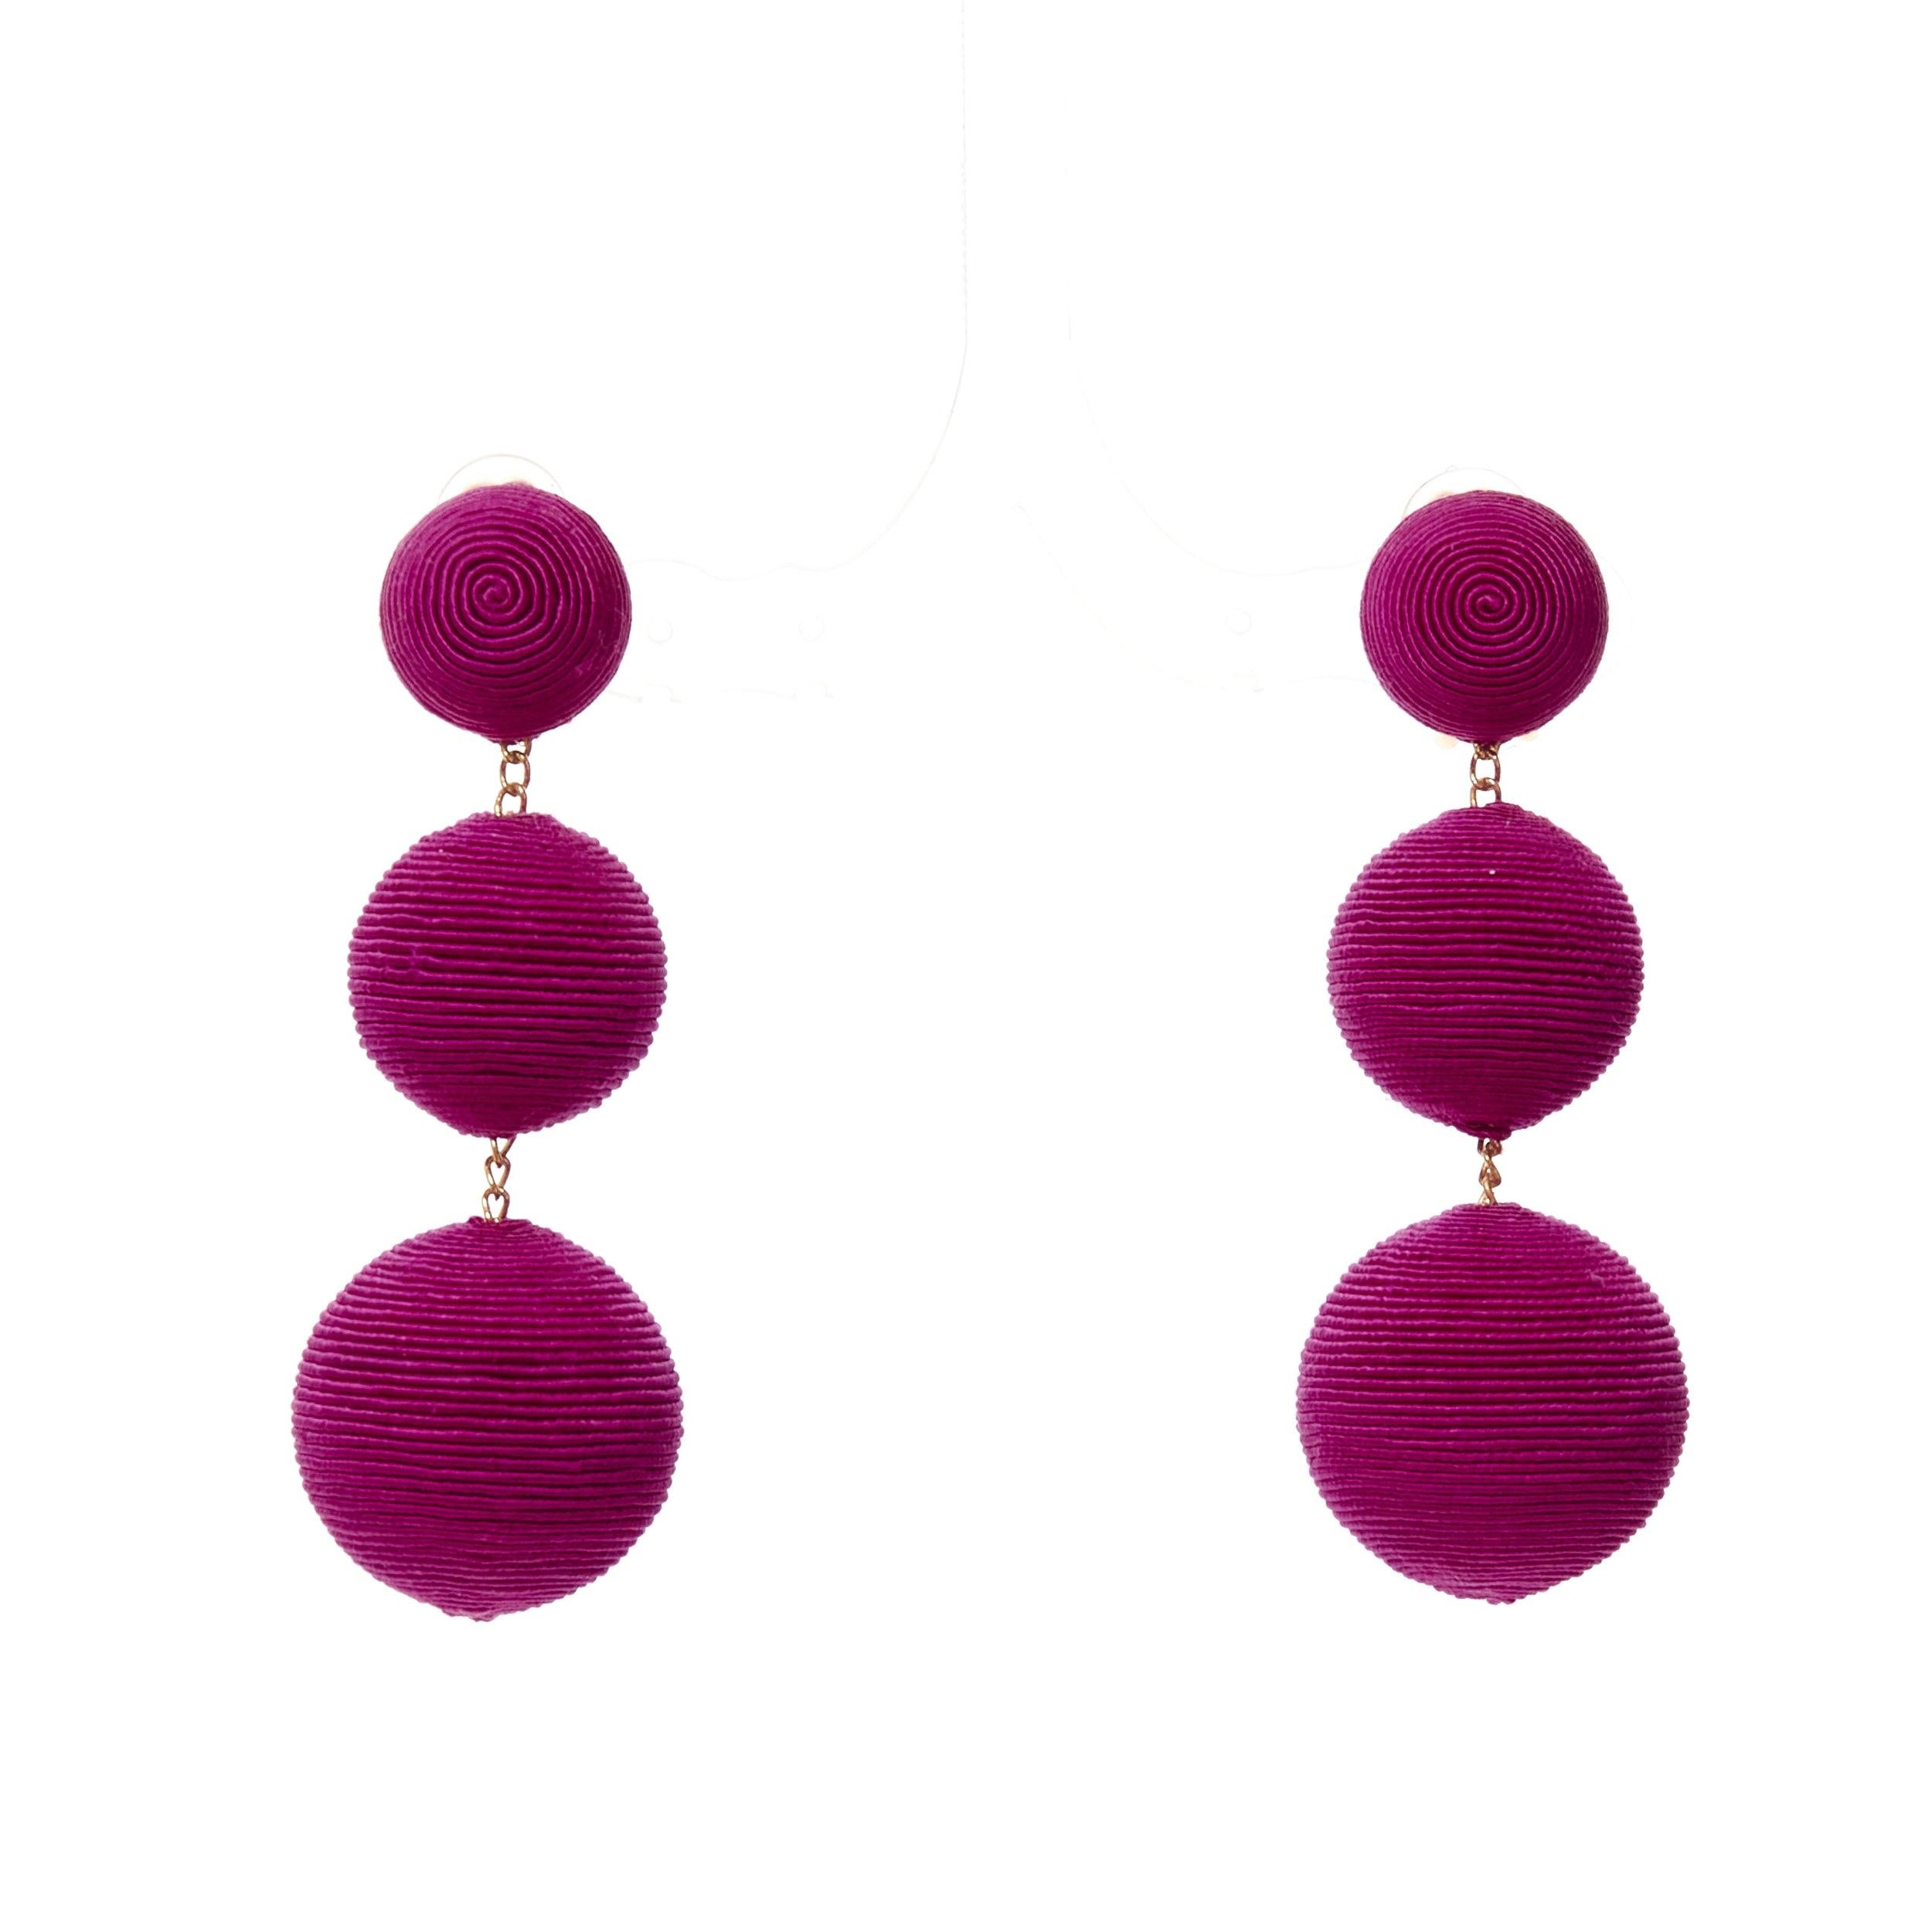 REBECCA DE RAVENEL purple fabric 3 tiered drop balls clip on earrings
Reference: AAWC/A01243
Brand: Rebecca De Ravenel
Material: Fabric
Color: Purple
Pattern: Solid
Closure: Clip On
Lining: Gold Metal

CONDITION:
Condition: Excellent, this item was